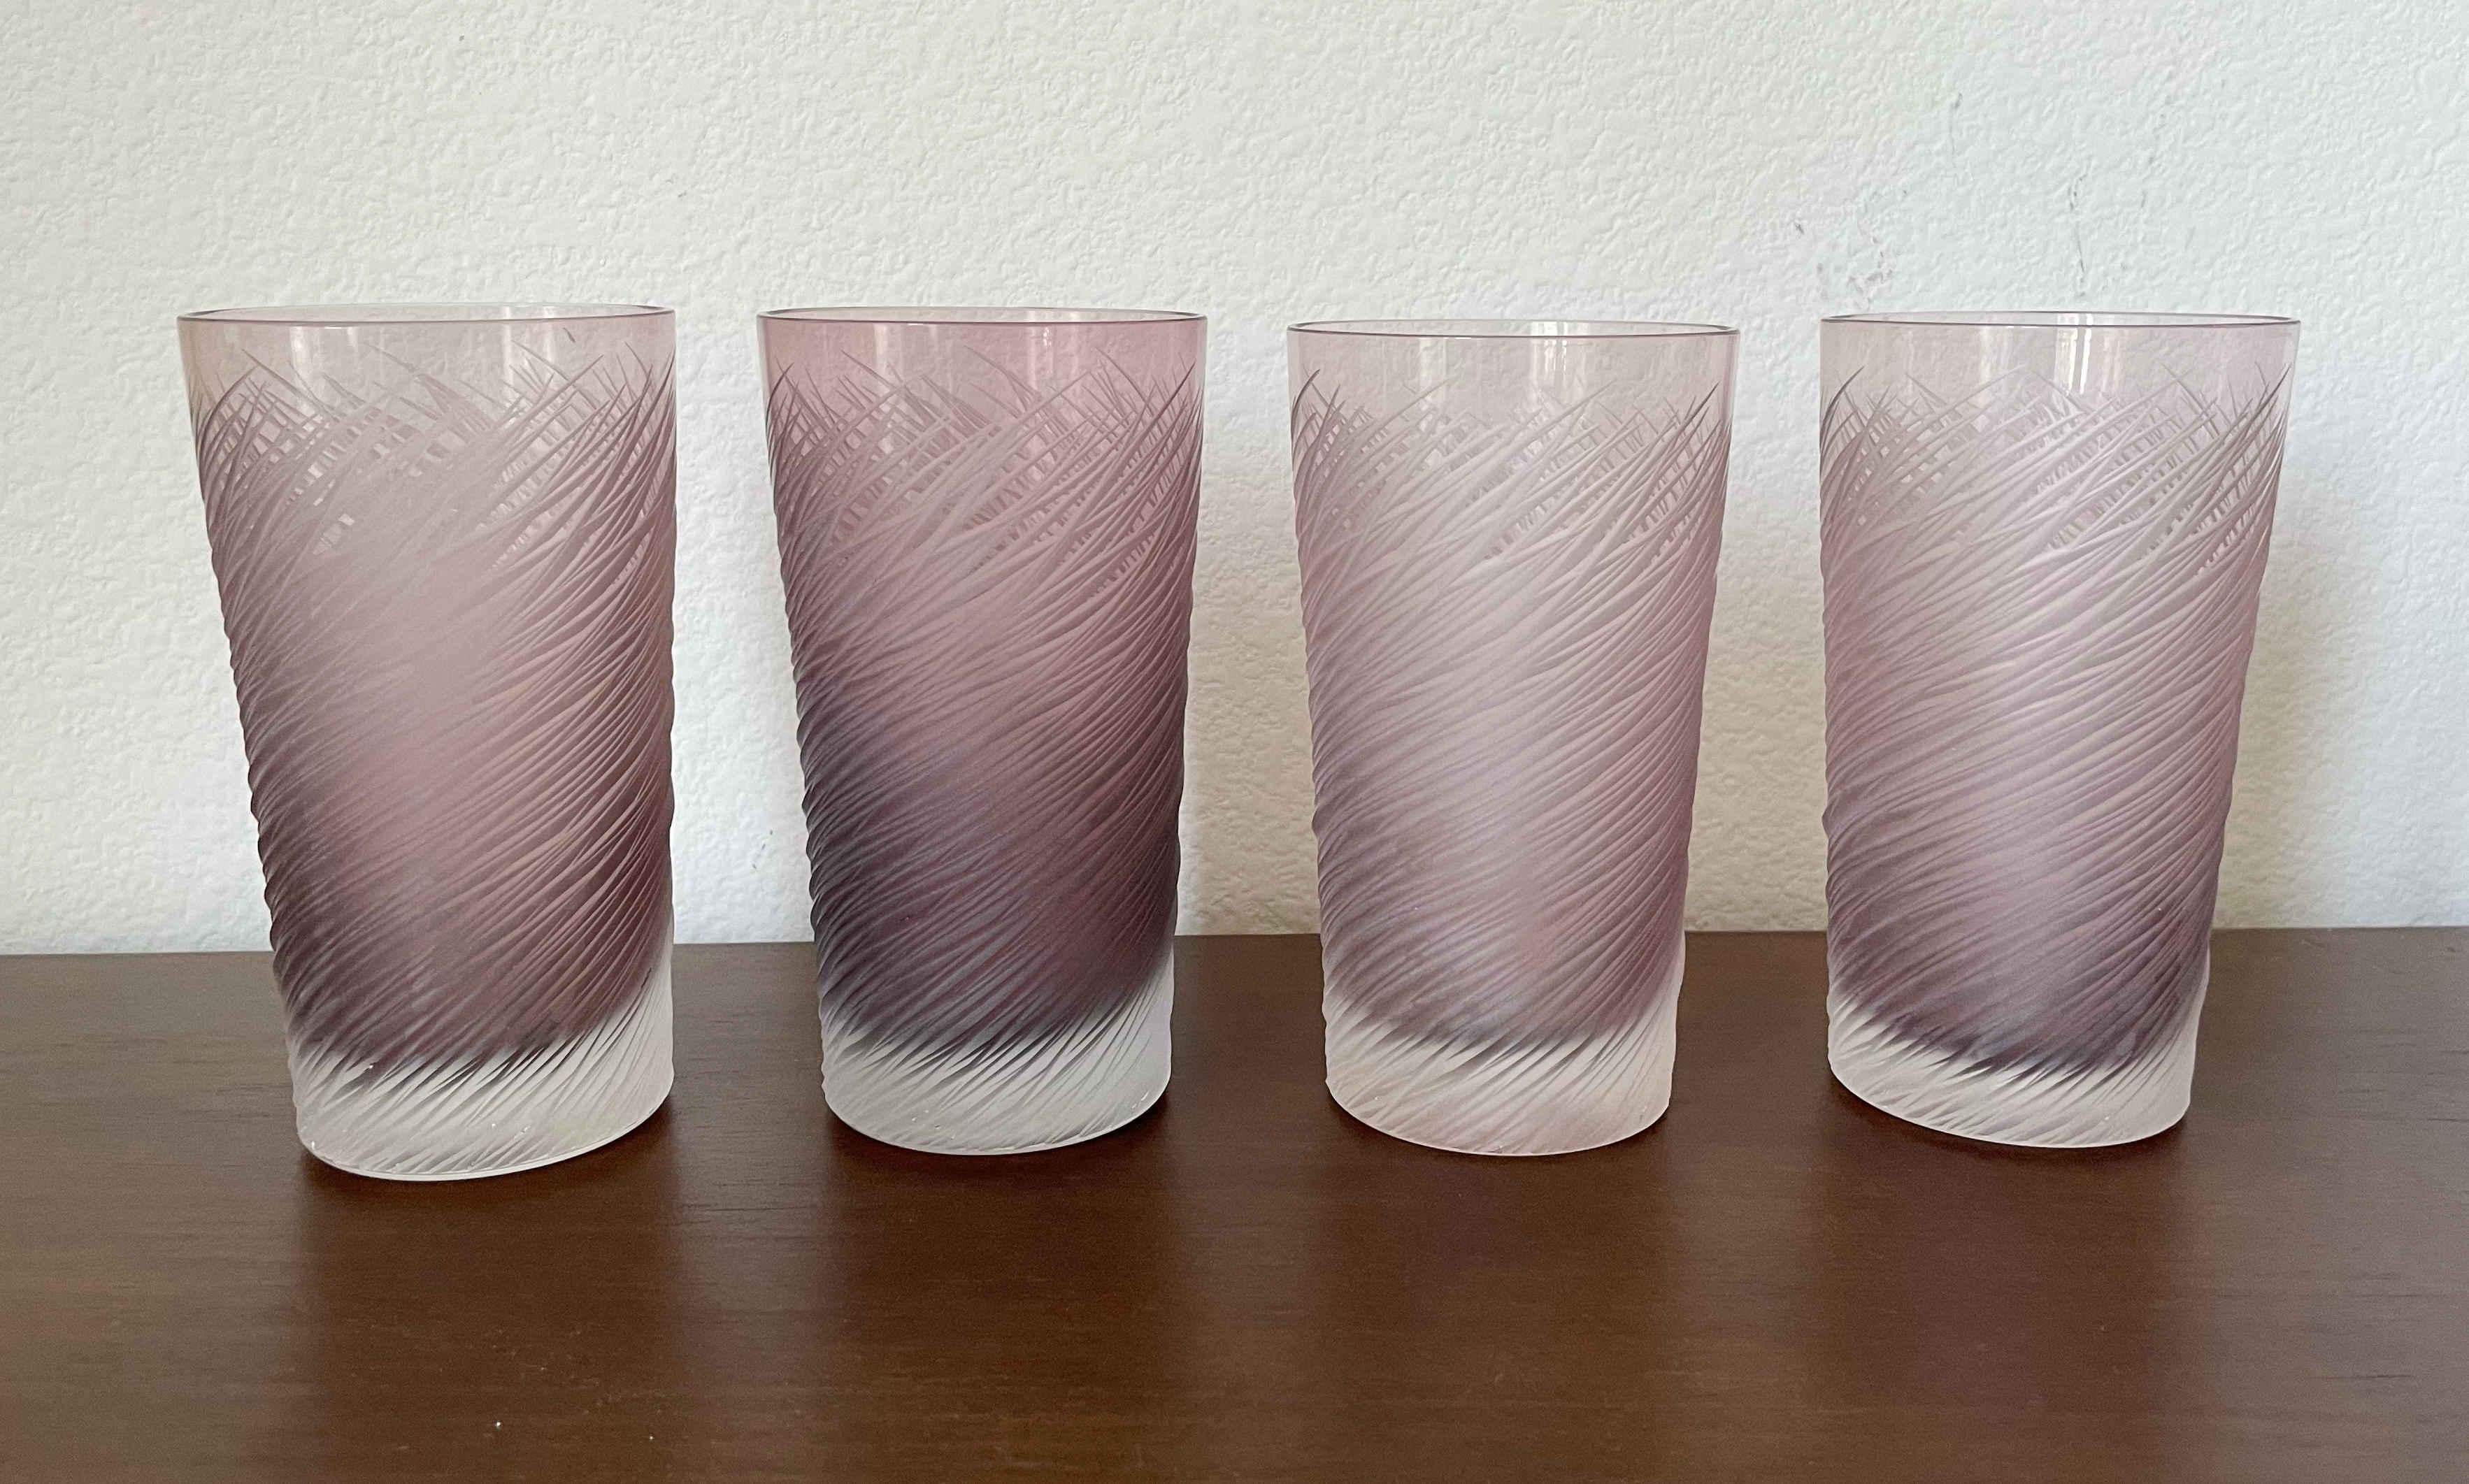 Set of 4 hand etched amethyst Murano glasses by Salviati / Made in Italy in the 2000s.
Original 